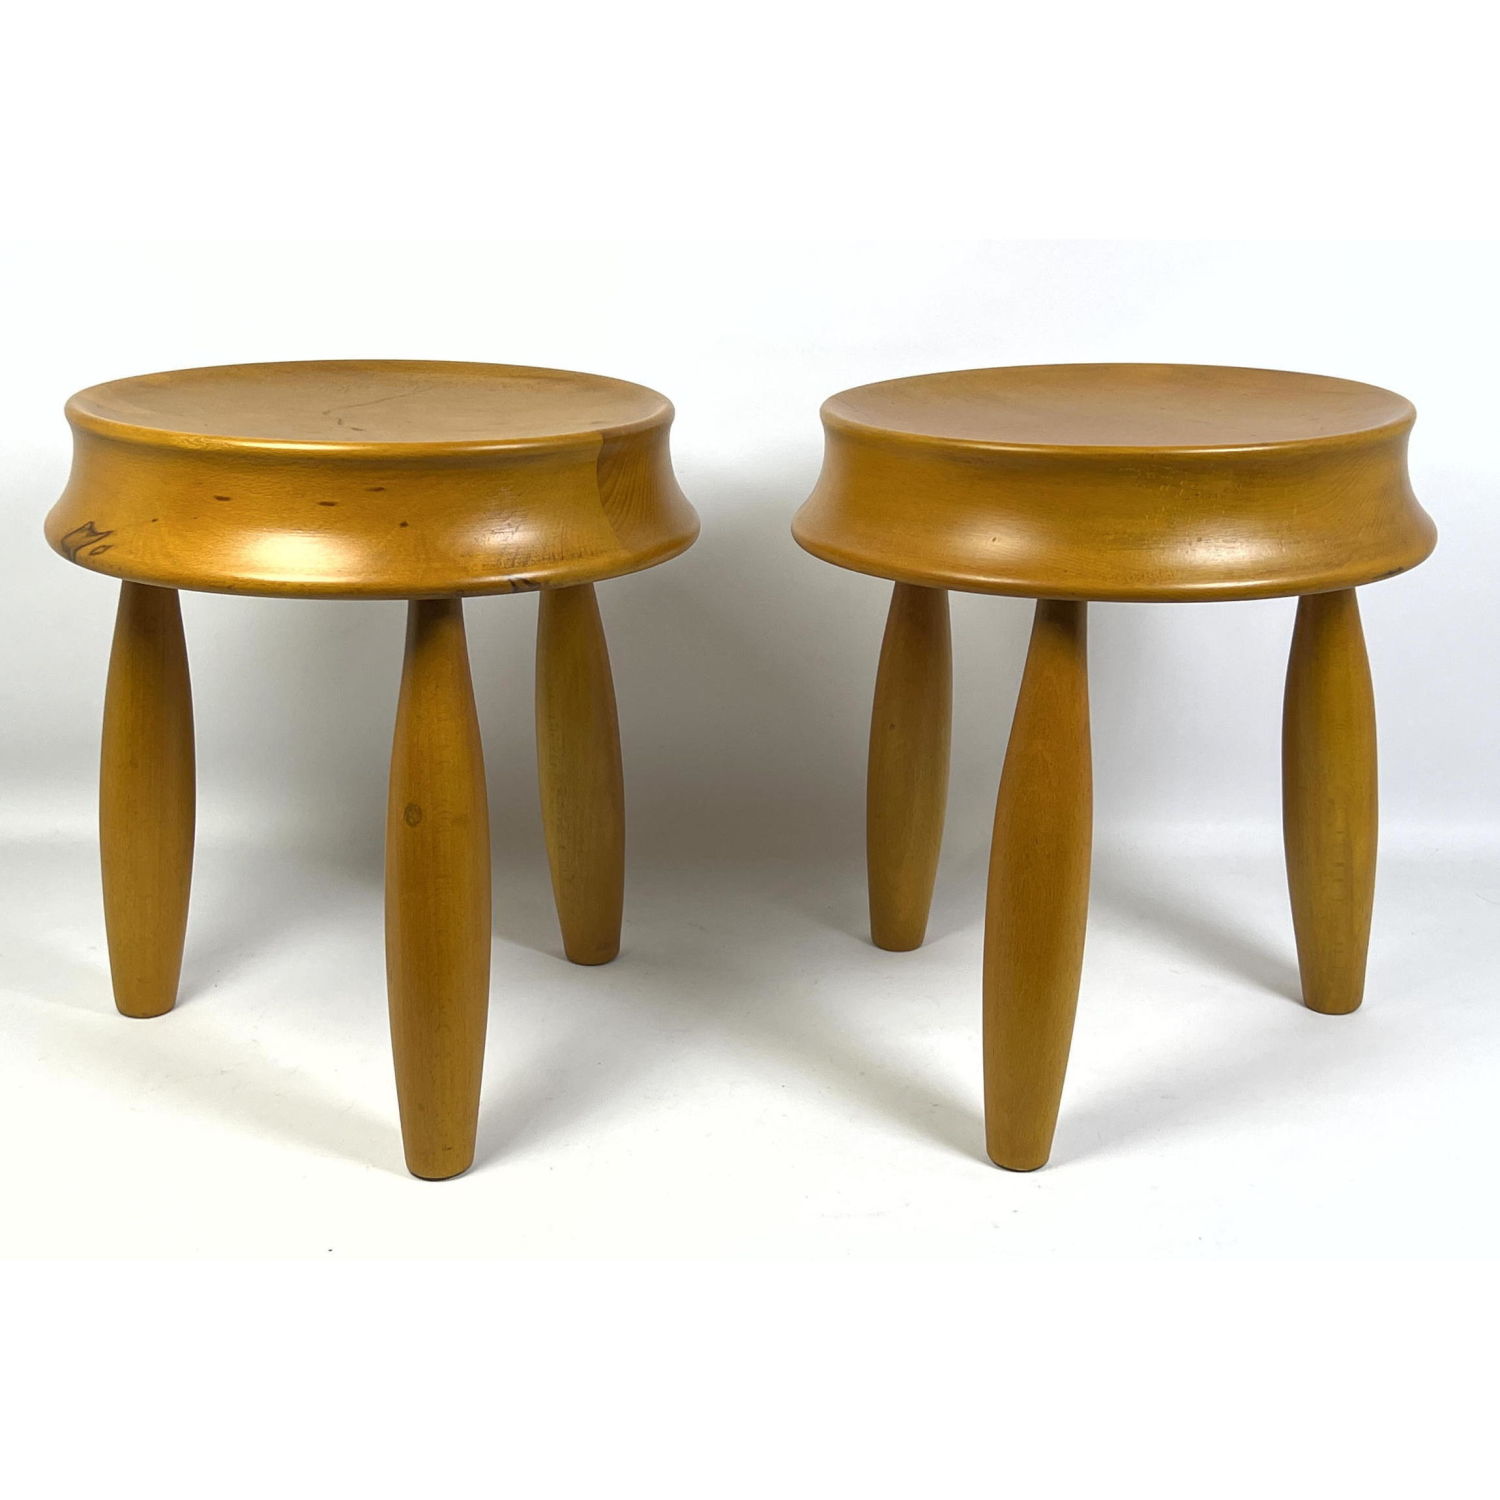 A pair of wood stools in the manner 2ba73b